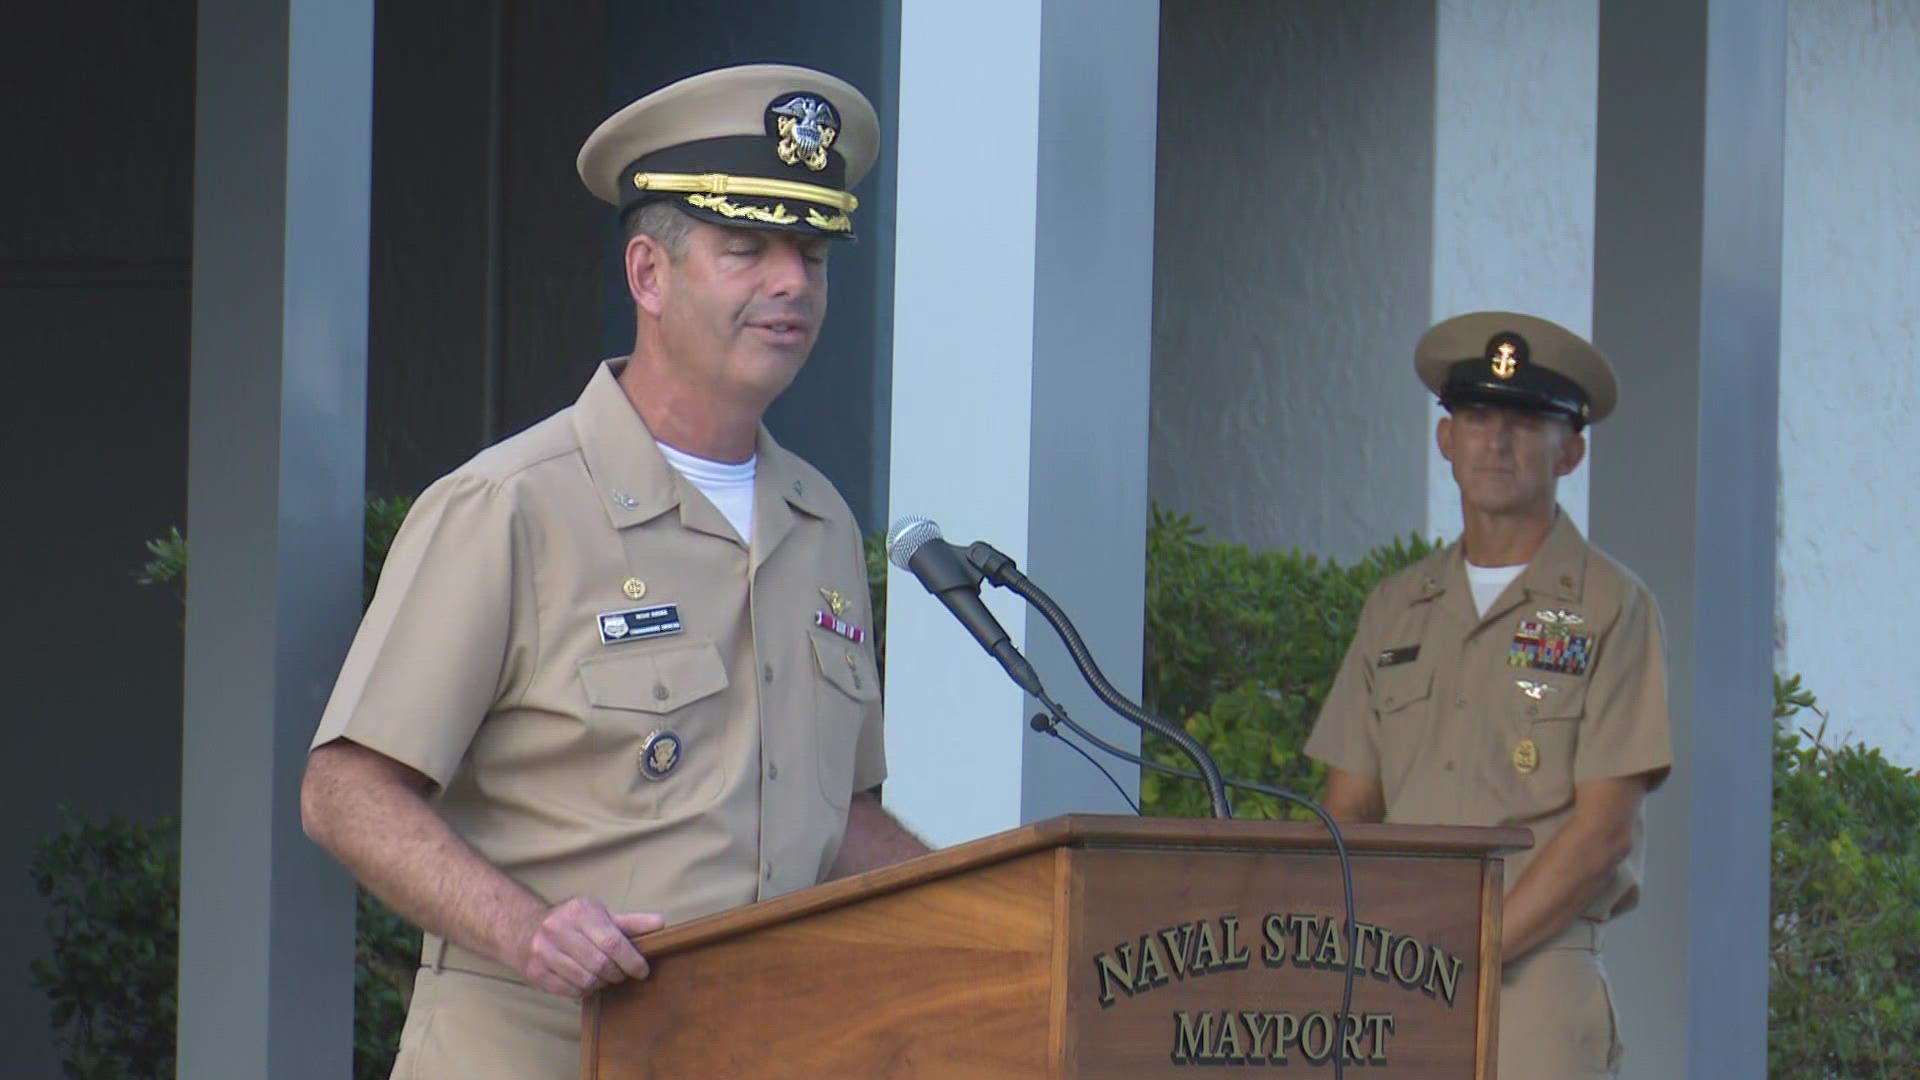 Naval Station Mayport Sailors and firefighters hold 9/11 ceremony to remember the fallen.